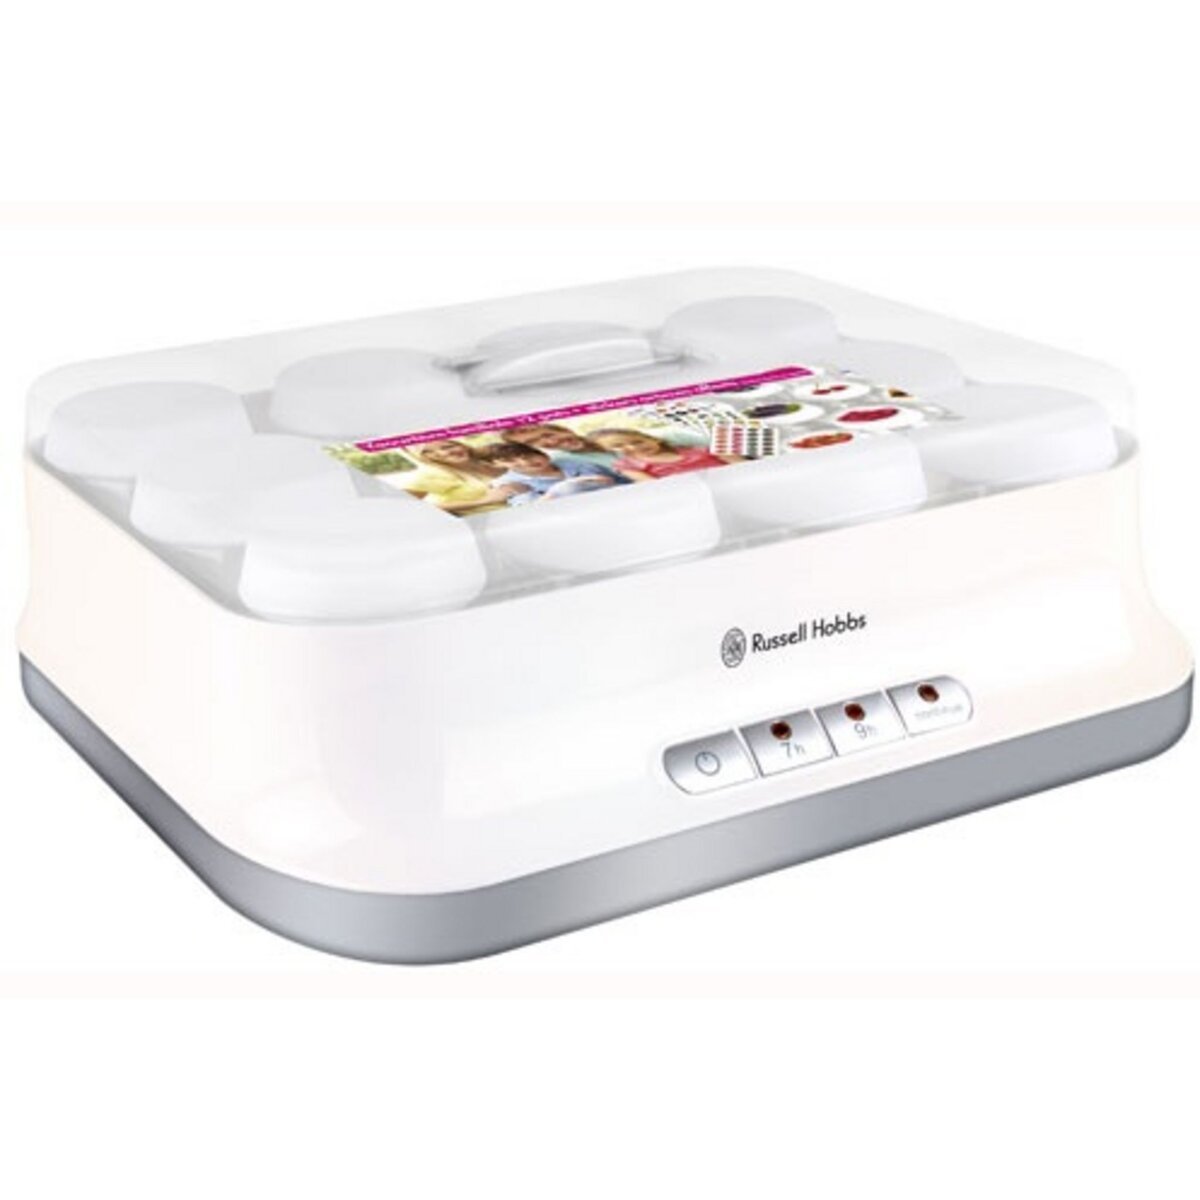 RUSSELL HOBBS Yaourtière Fromagère 18317-56 Blanc 12 Pots